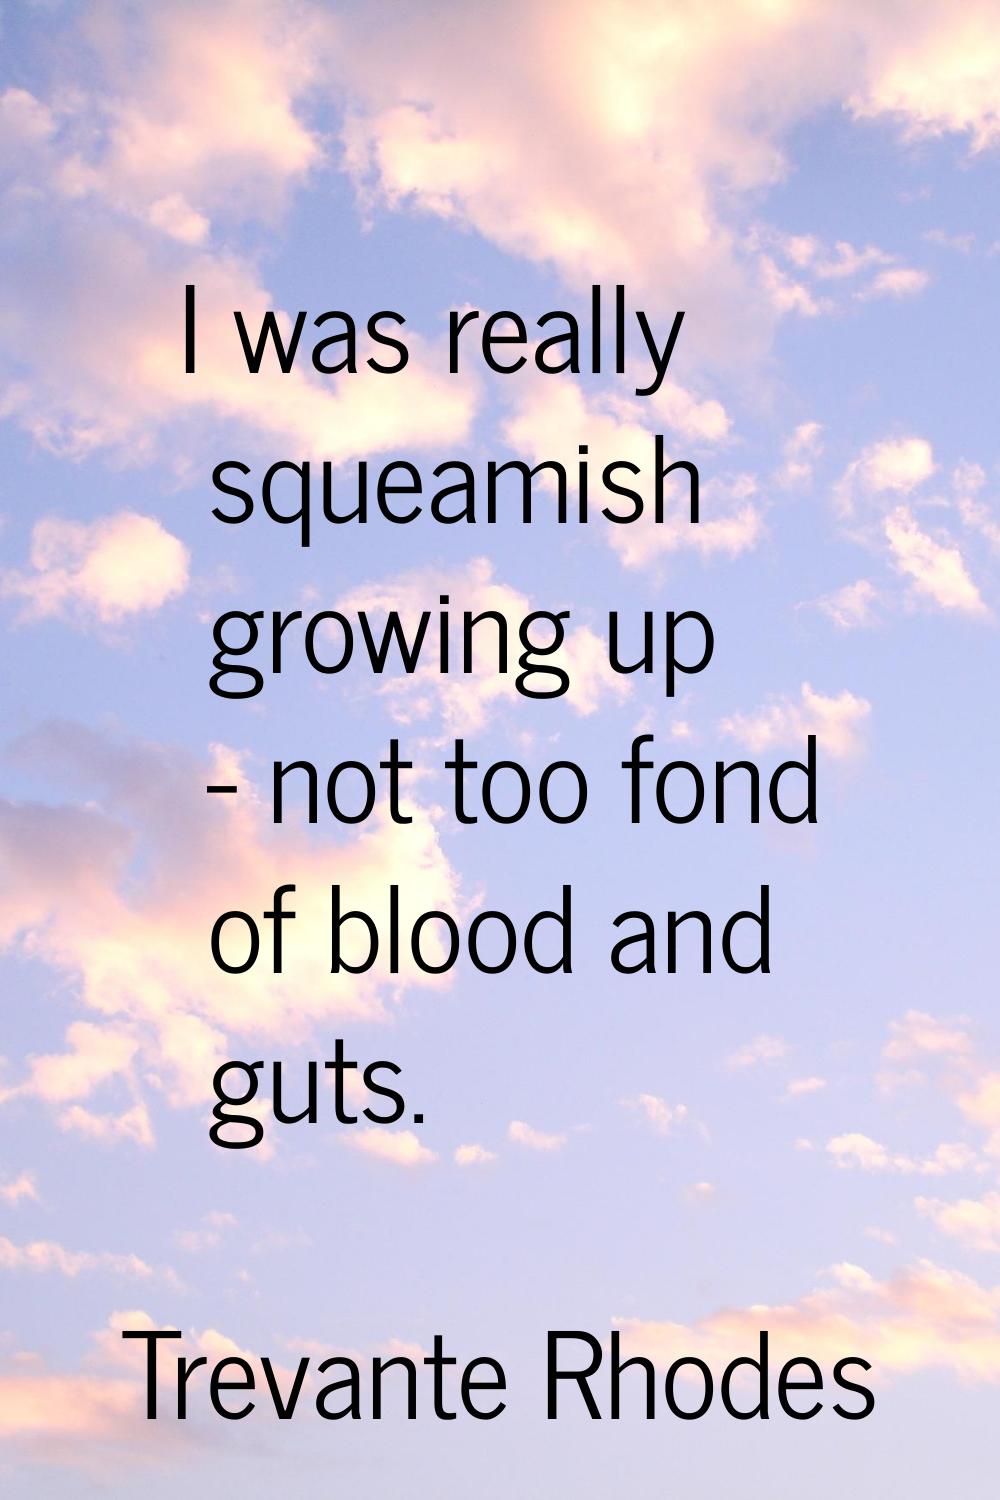 I was really squeamish growing up - not too fond of blood and guts.